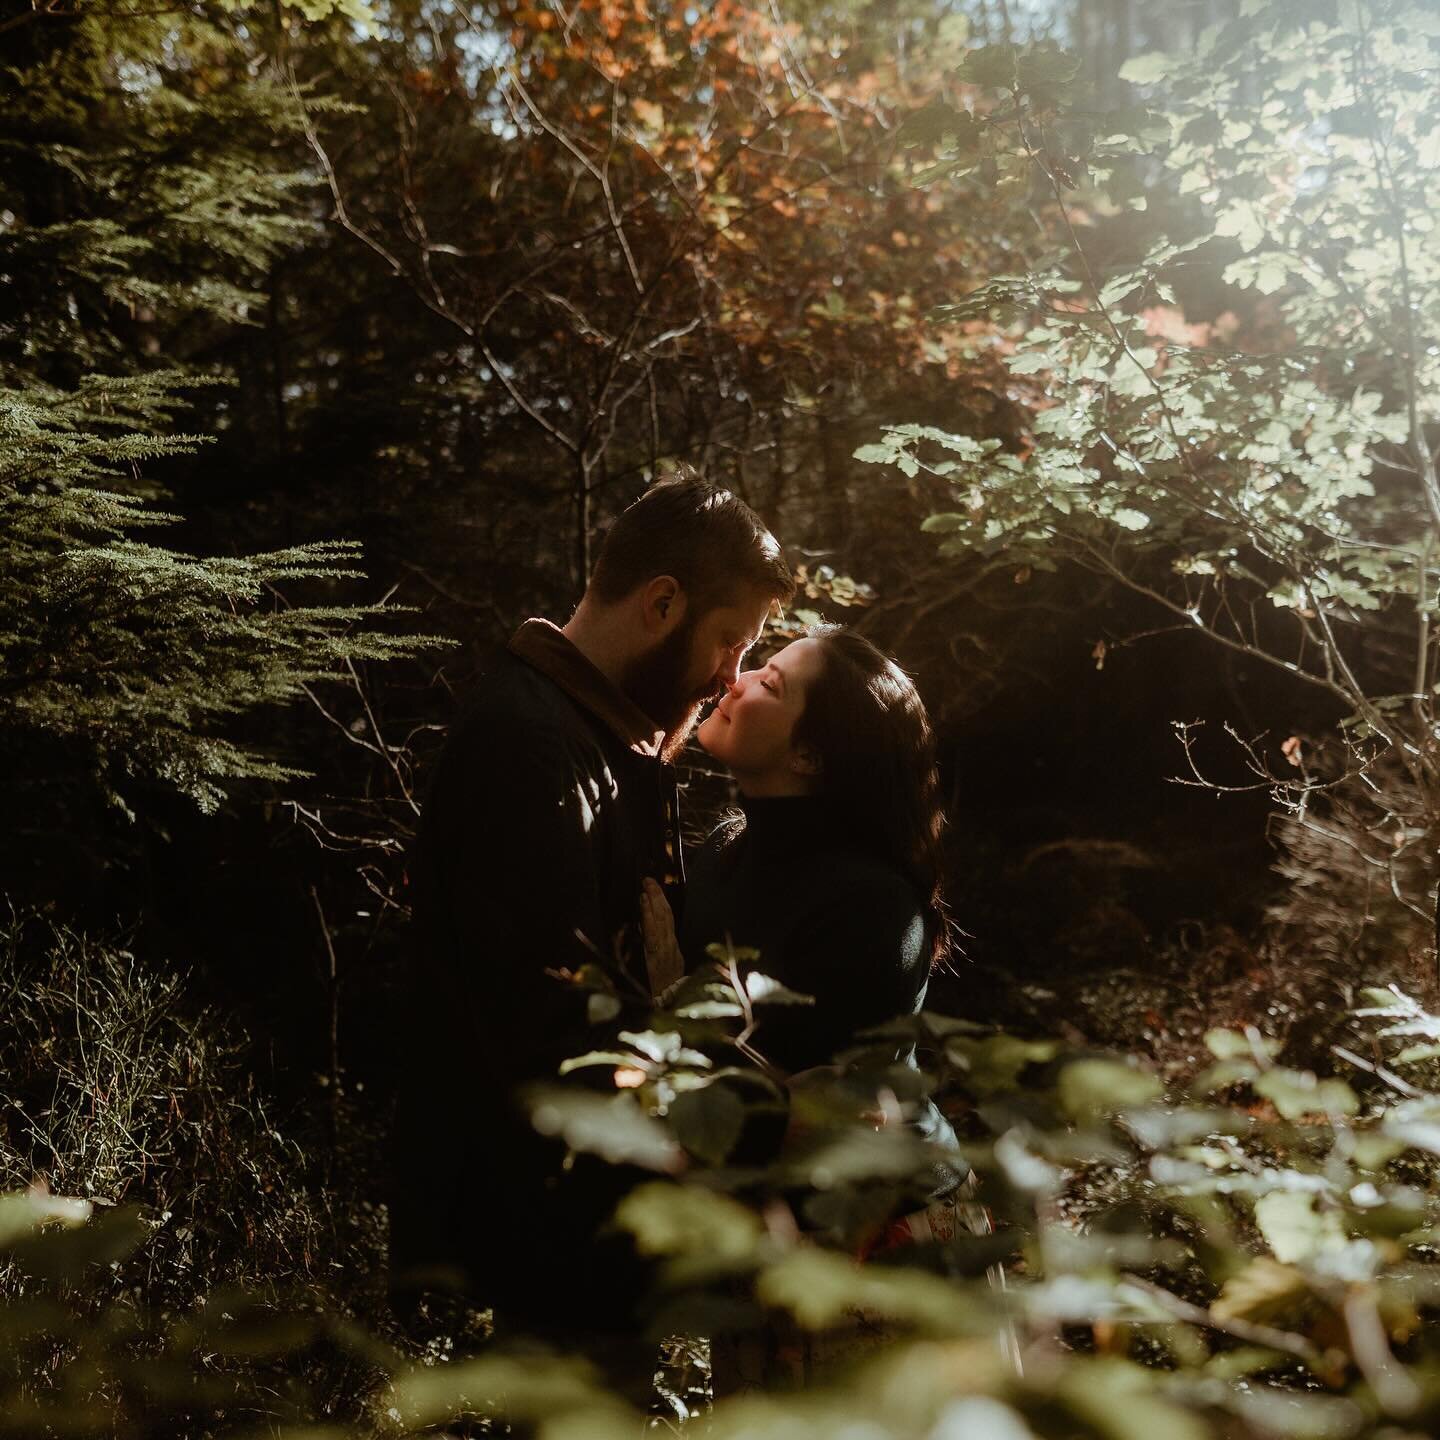 Had an incredible adventure couple shoot with Maria and Philip in Wicklow! Despite the chilly weather, we had a fantastic day exploring the beautiful landscapes. It's moments like these that make you appreciate the magic of nature and love. 
.
.
.
.
